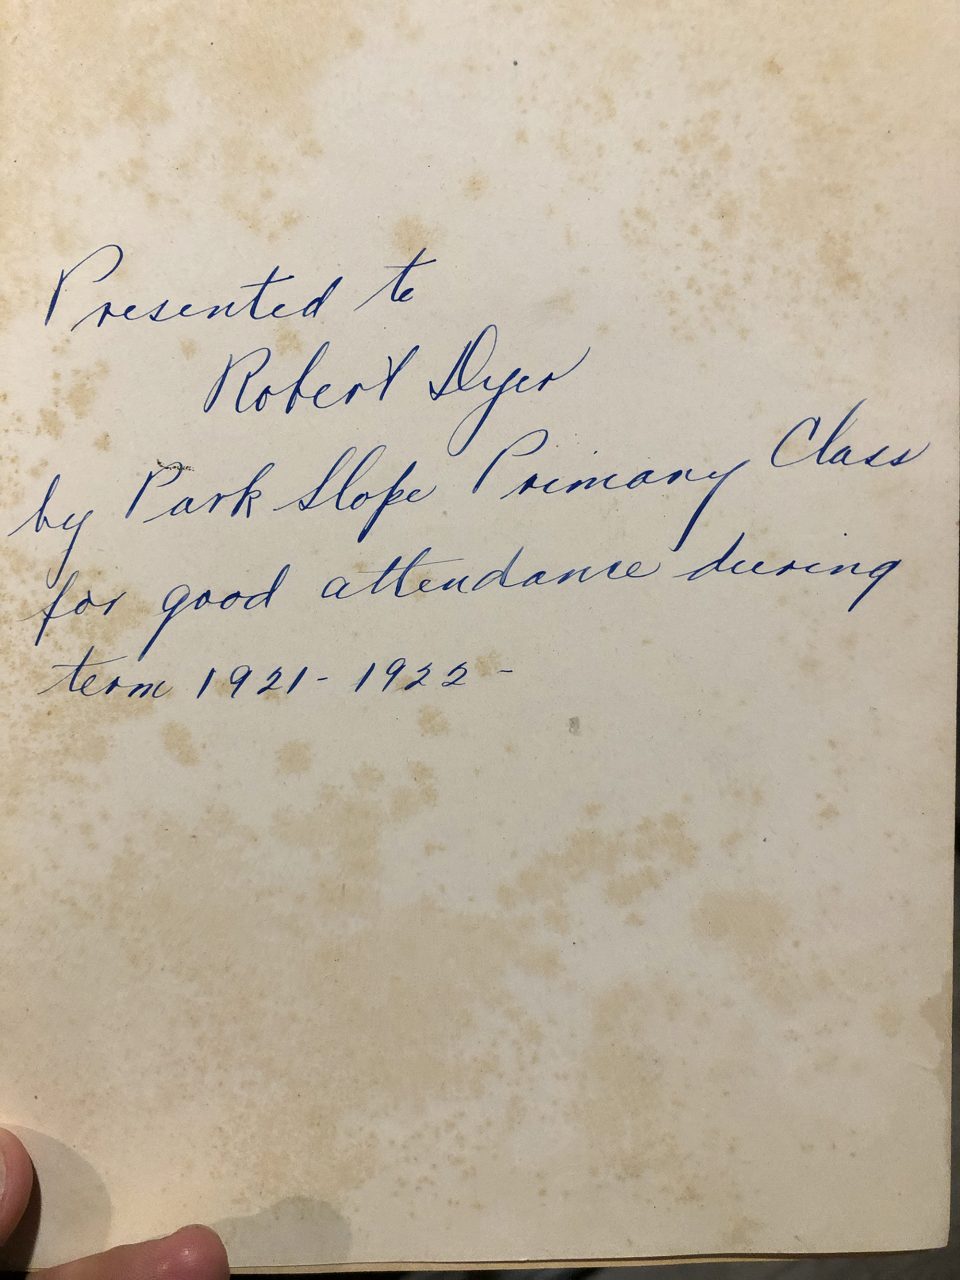 This beautifully written inscription says, "Presented to Robert Dyer by Park Slop Primary Class for good attendance during term 1921-1922." Park Slope is a neighborhood of Brooklyn, N.Y.